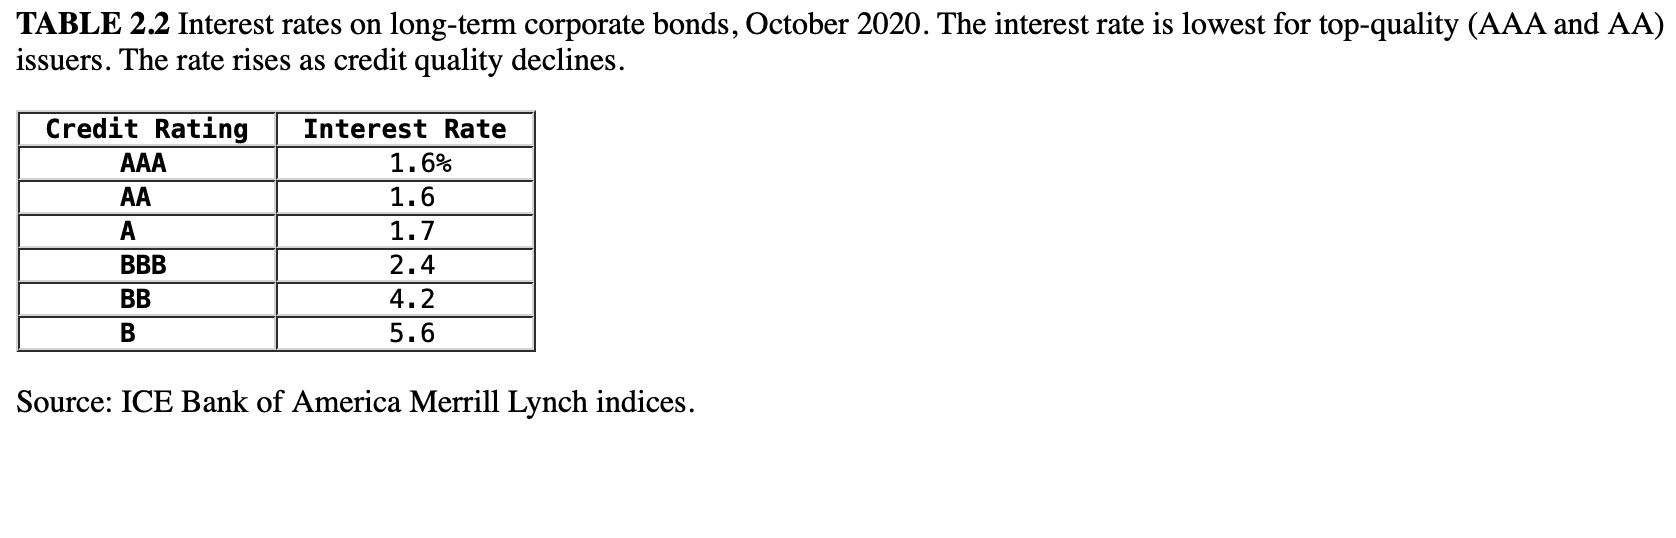 TABLE 2.2 Interest rates on long-term corporate bonds, October 2020. The interest rate is lowest for